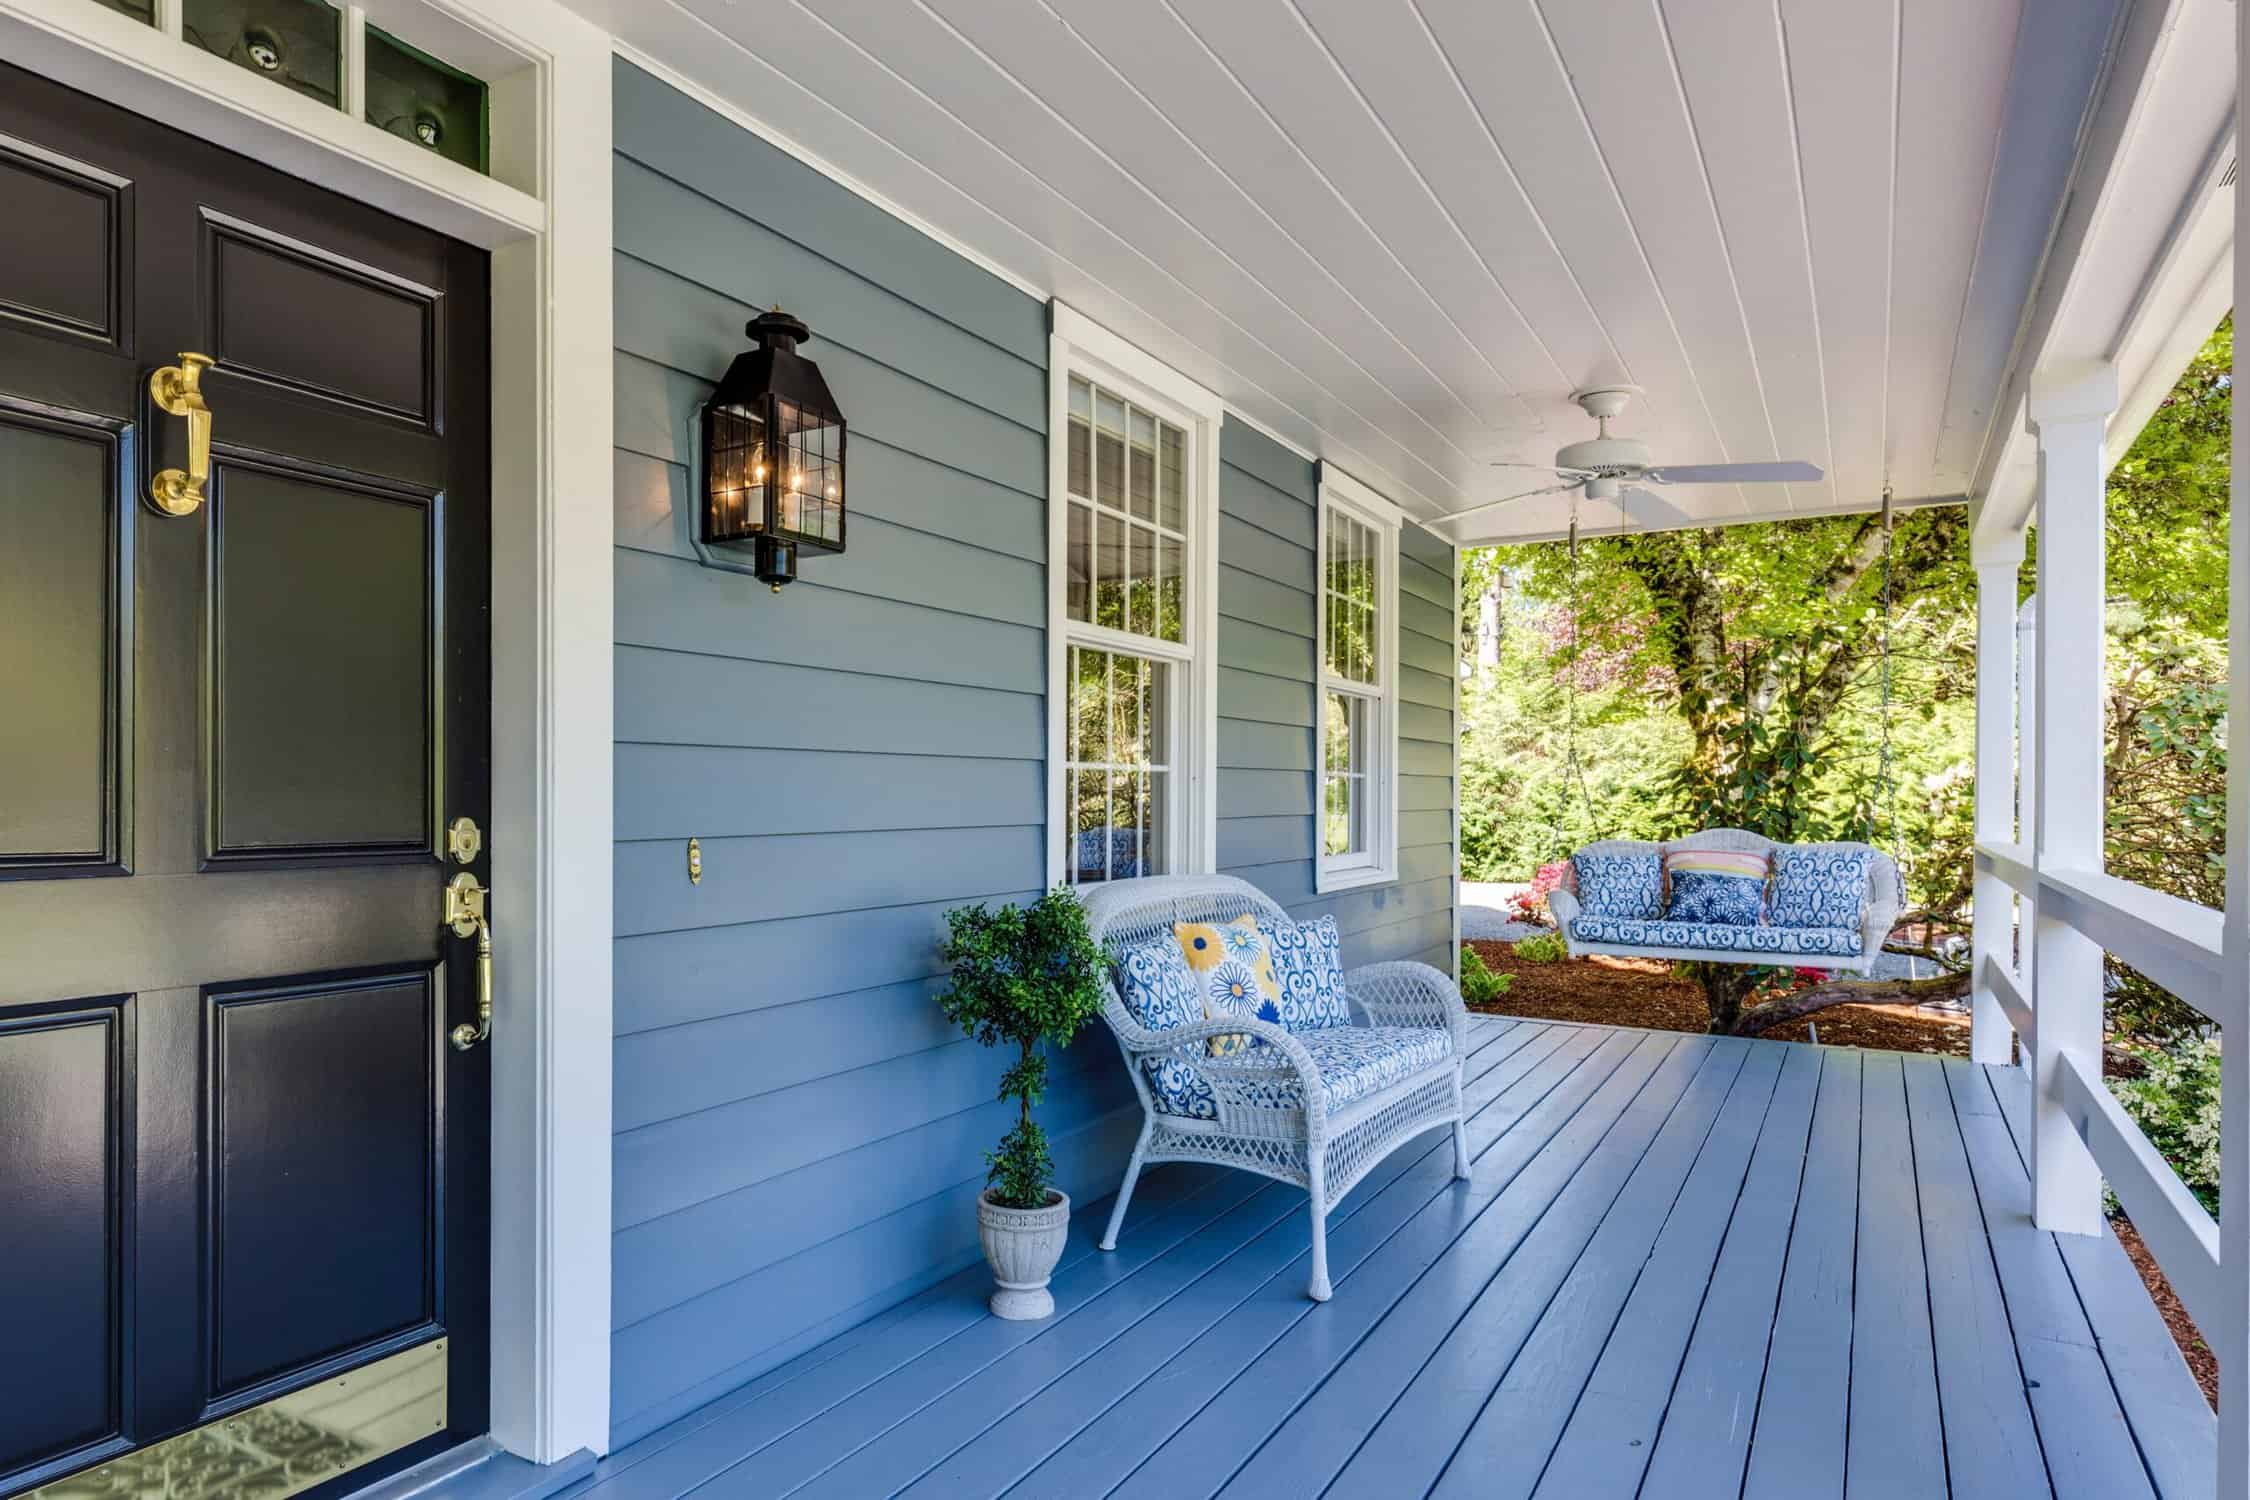 Blue coastal-inspired deck with overlooking garden.

exterior house painting temperature
